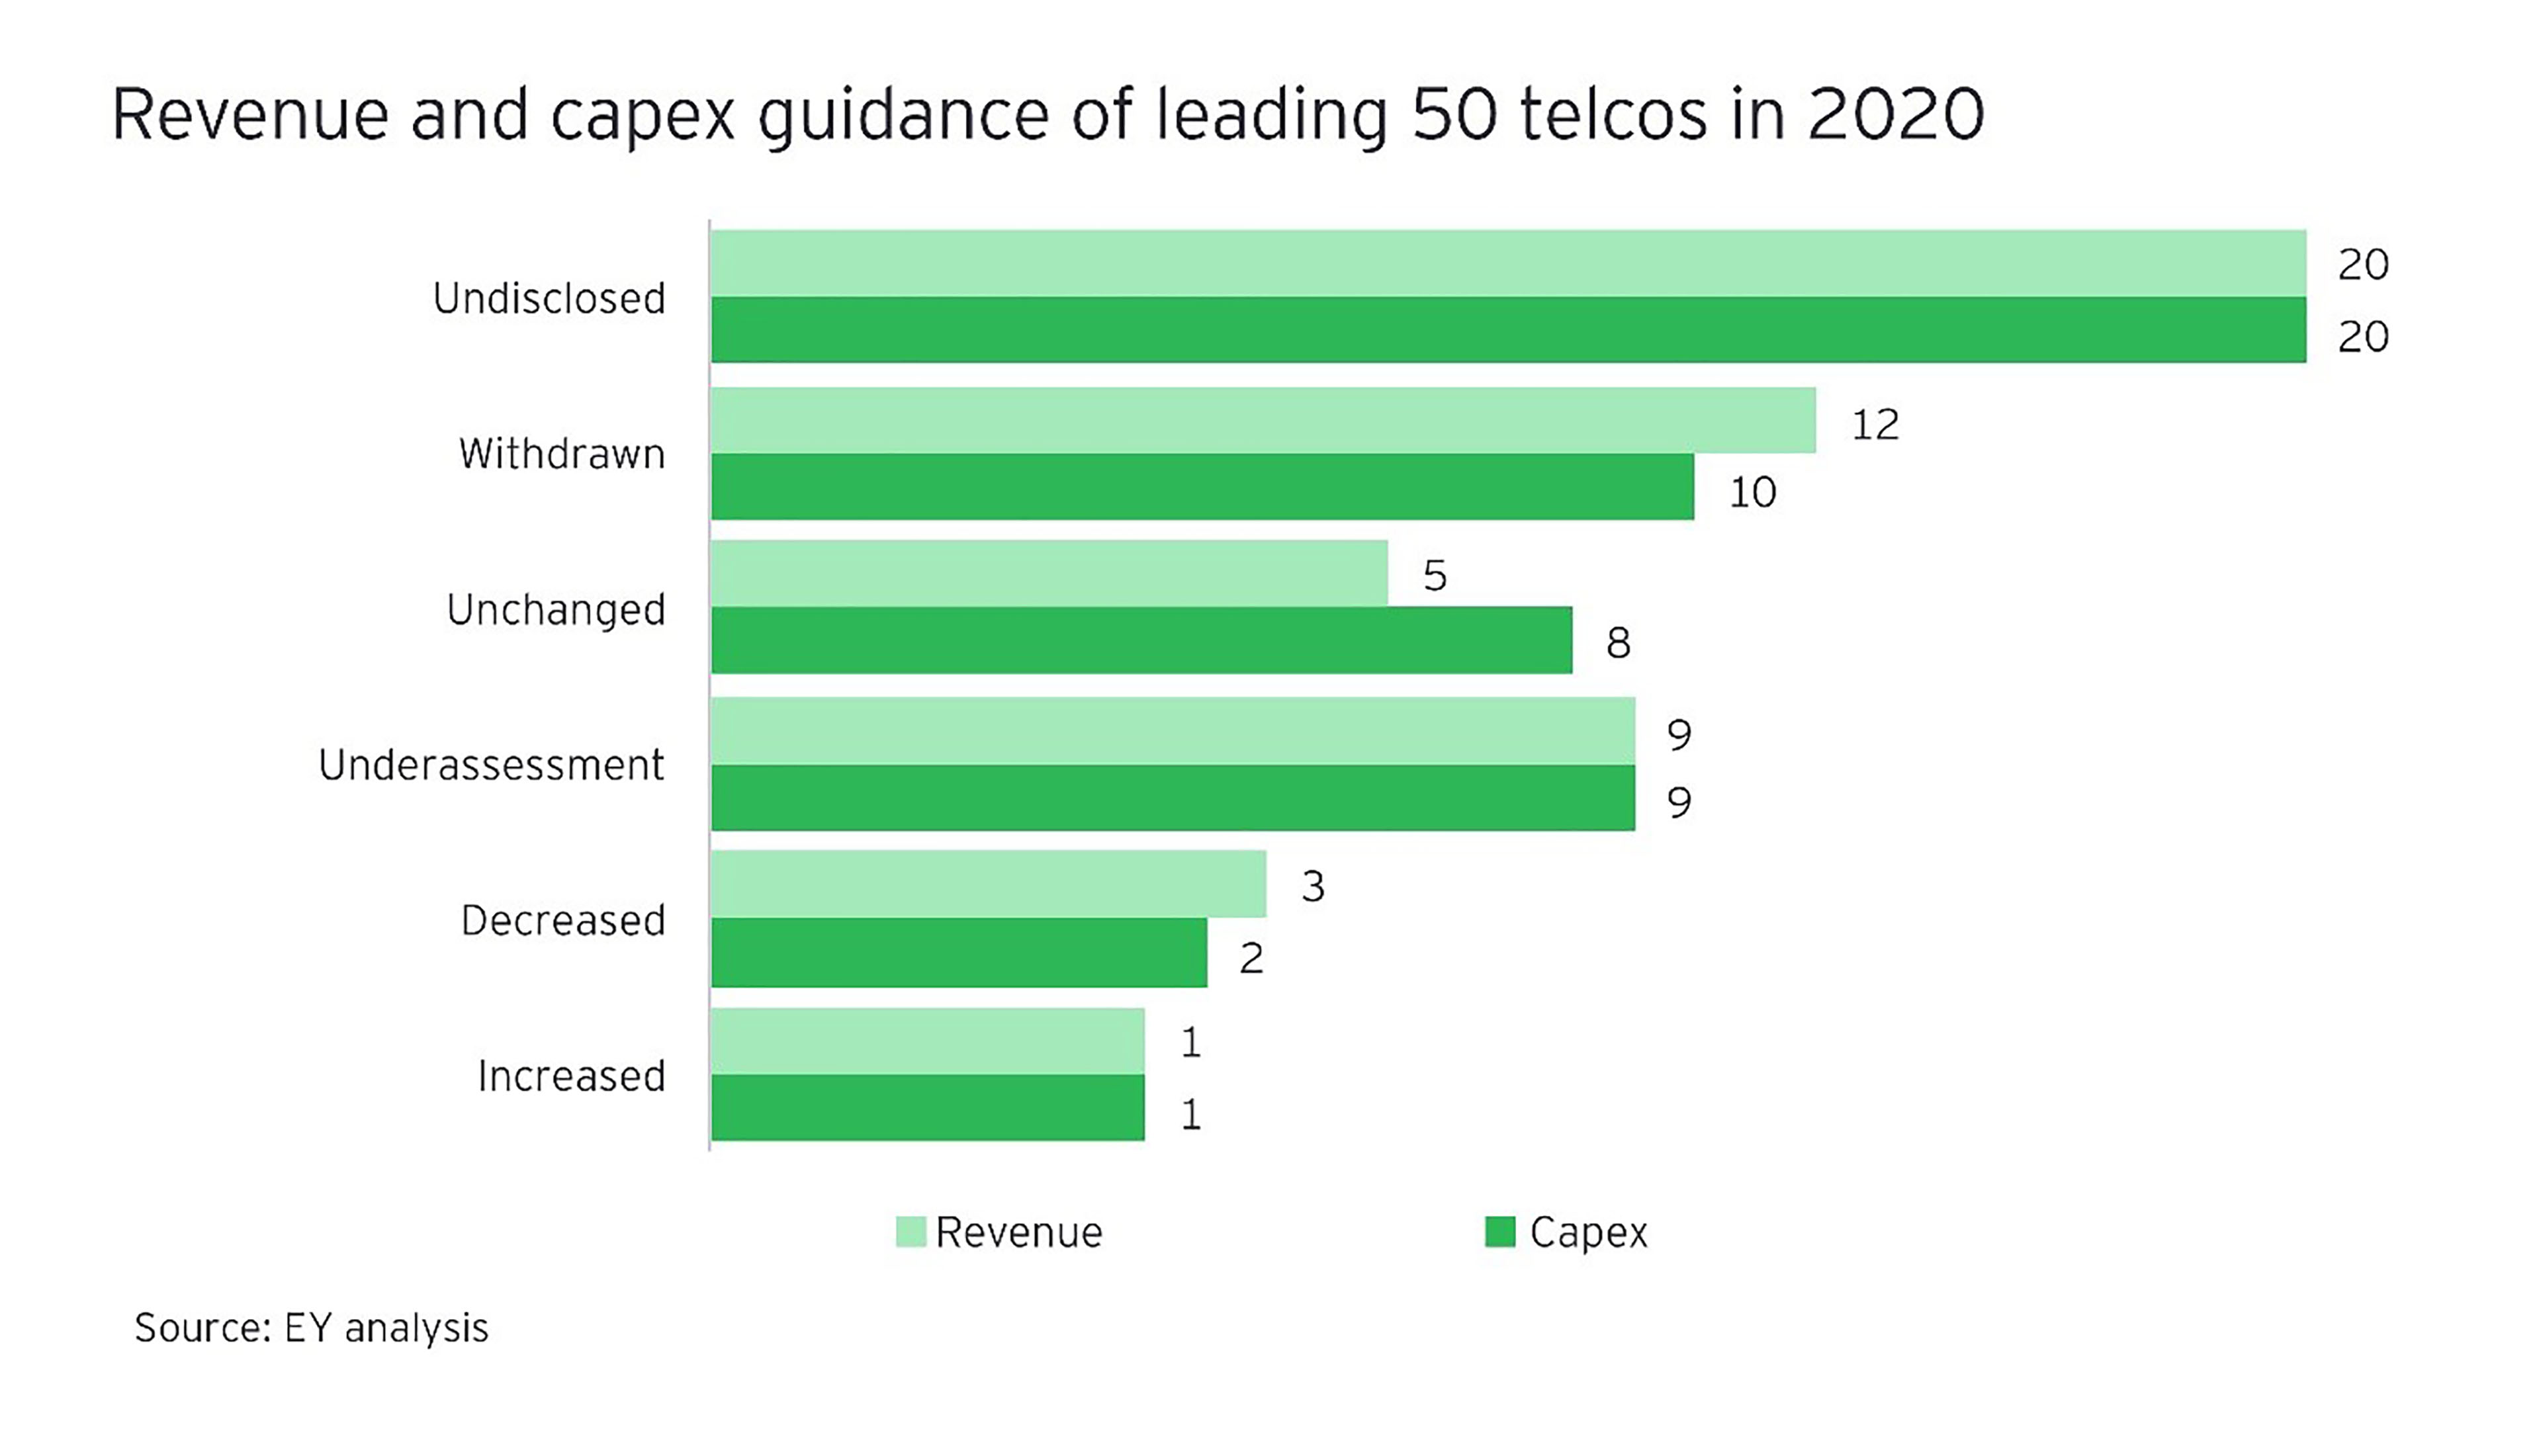 Revenue and capex guidance of 50 leading telcos in 2020